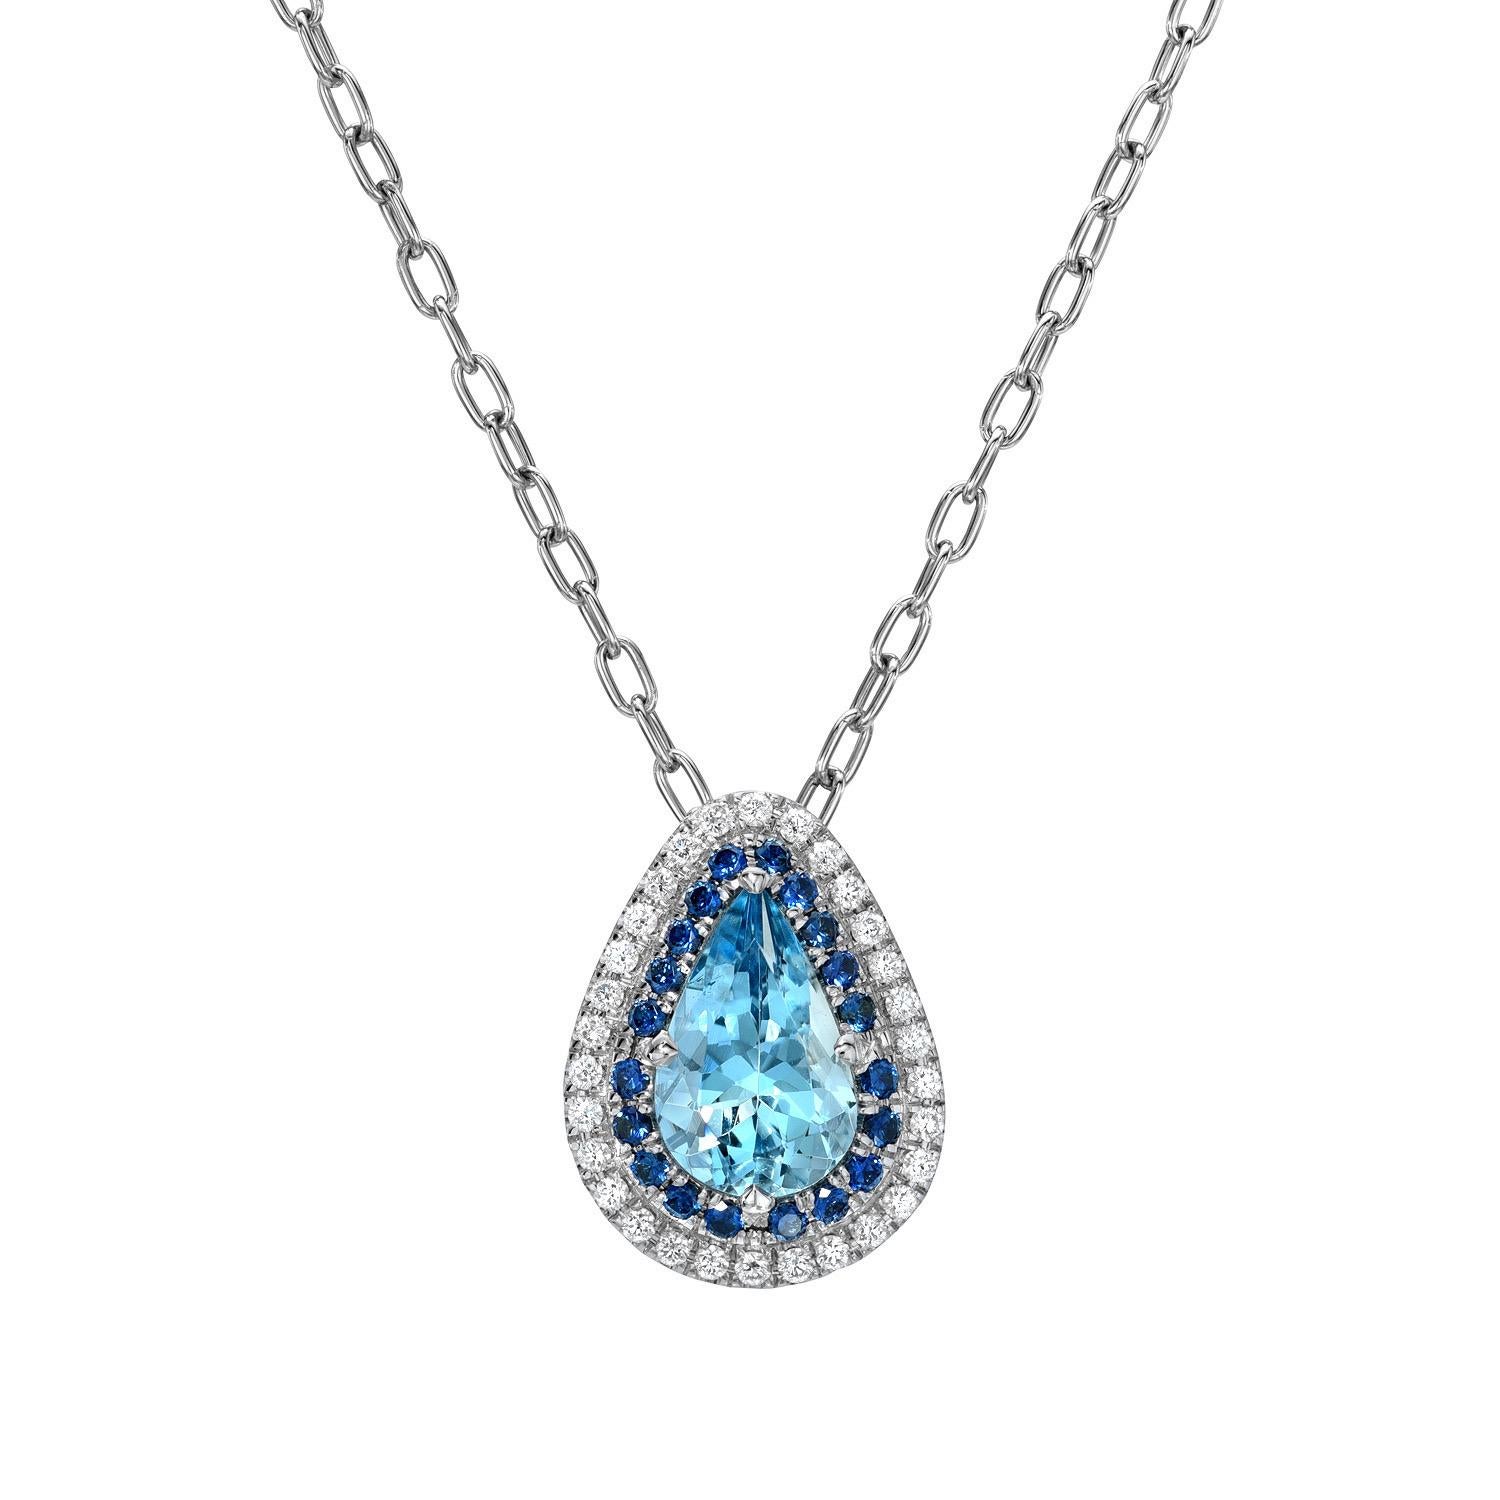 18K white gold necklace set with a 2.24 carat Aquamarine pear shape, decorated with a double halo set with a total of 0.33 carat Blue Sapphires, and a total of 0.26 carat F-G/VS round brilliant diamonds.

Returns are accepted and paid by us within 7